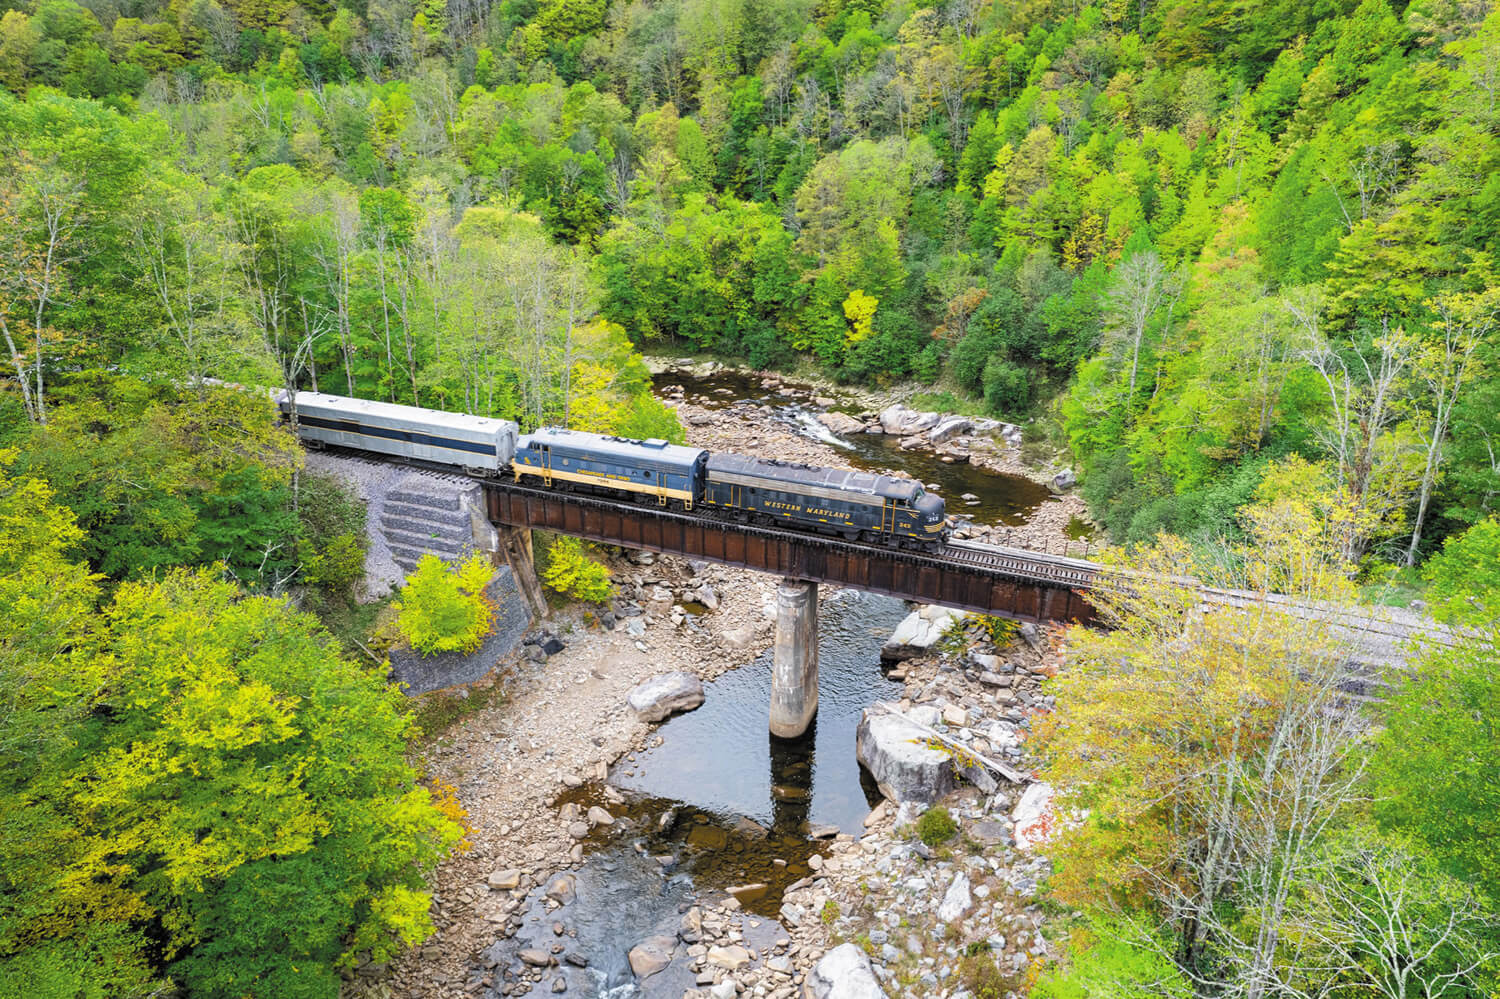 the new tygart flyer train excursion